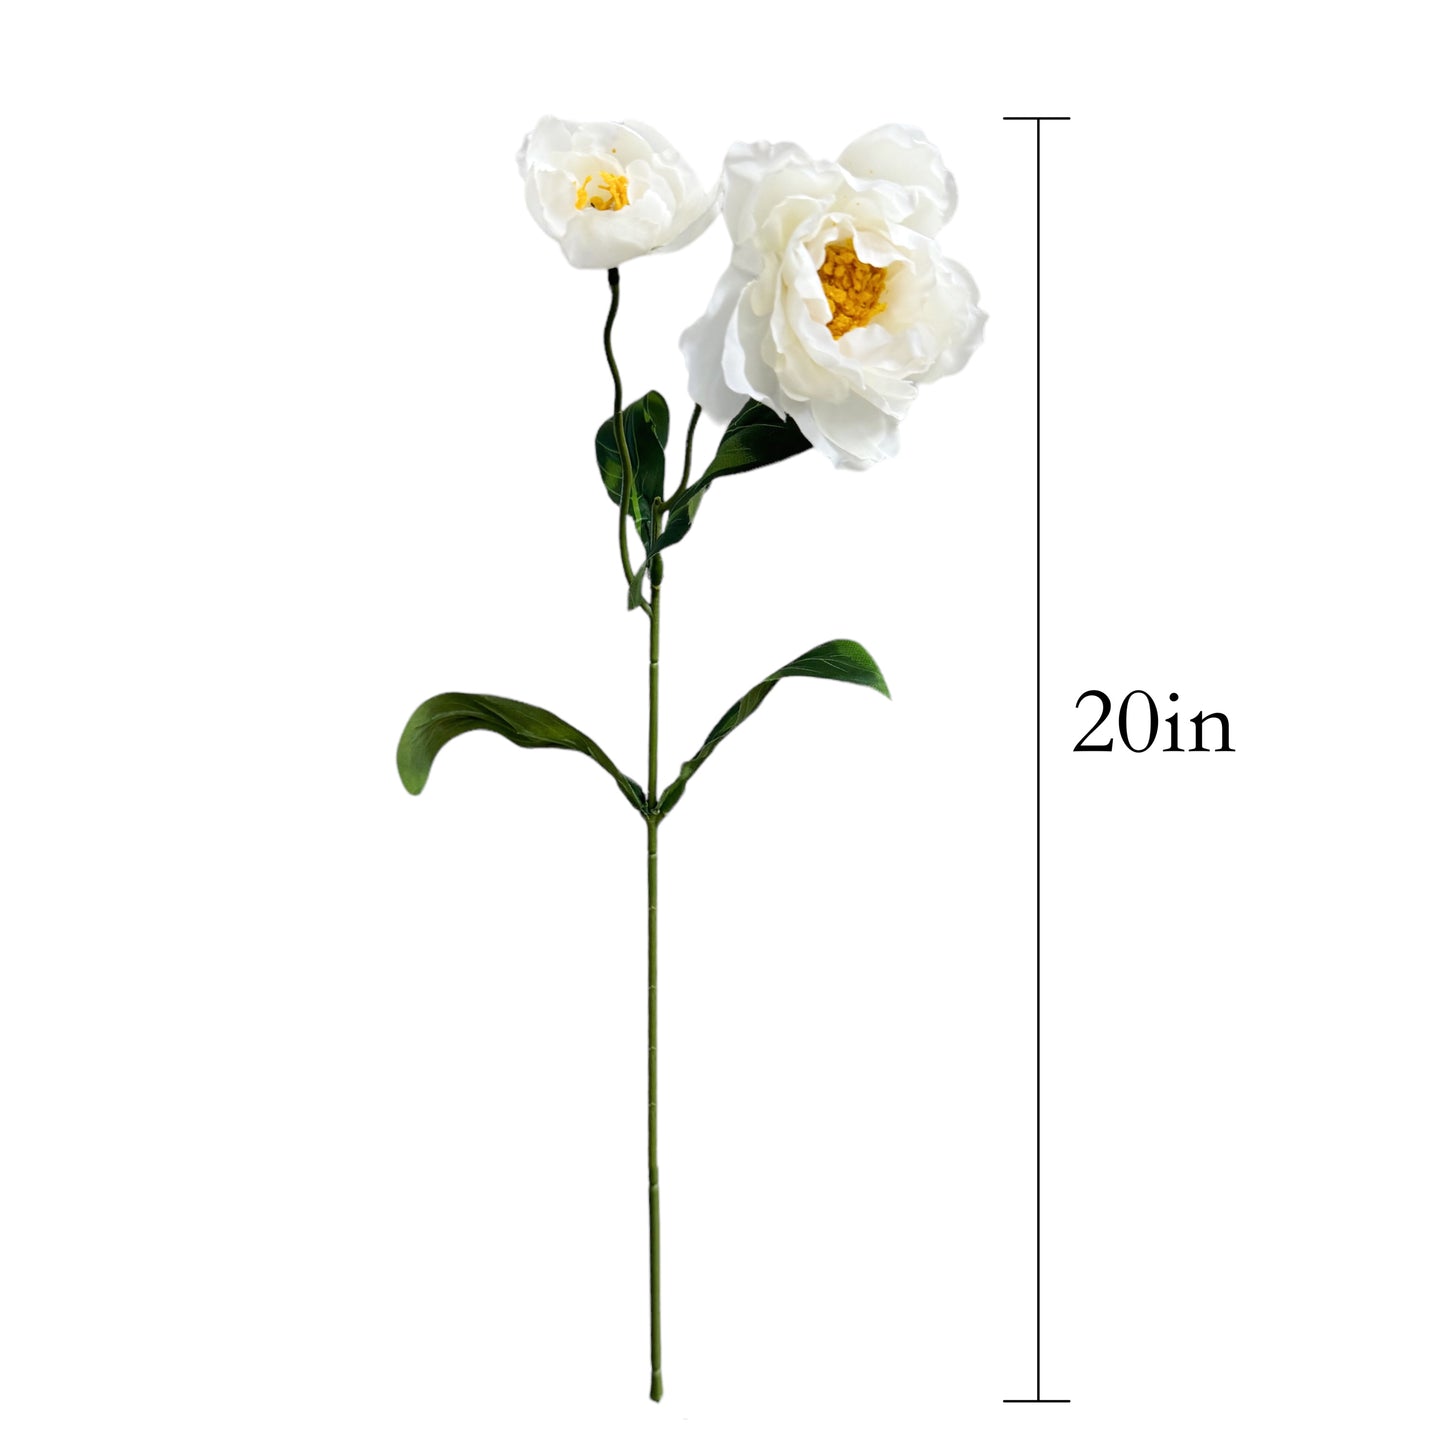 Artificial Poppy Flower Stems (Set of 6) - Multiple Colors Available